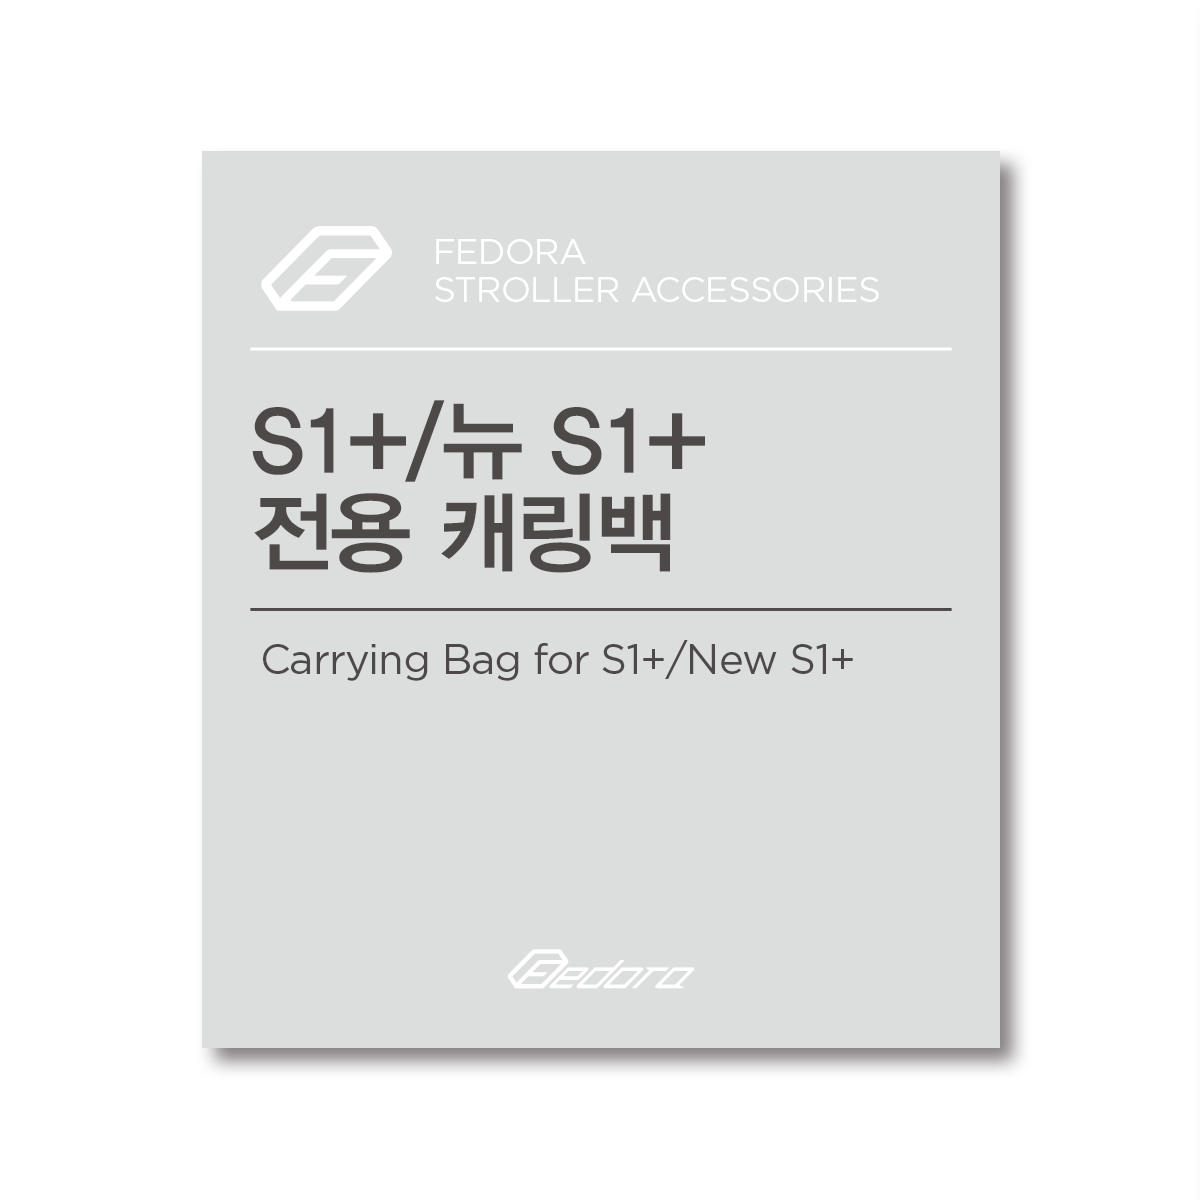 S1+/New S1+ 전용 캐링백